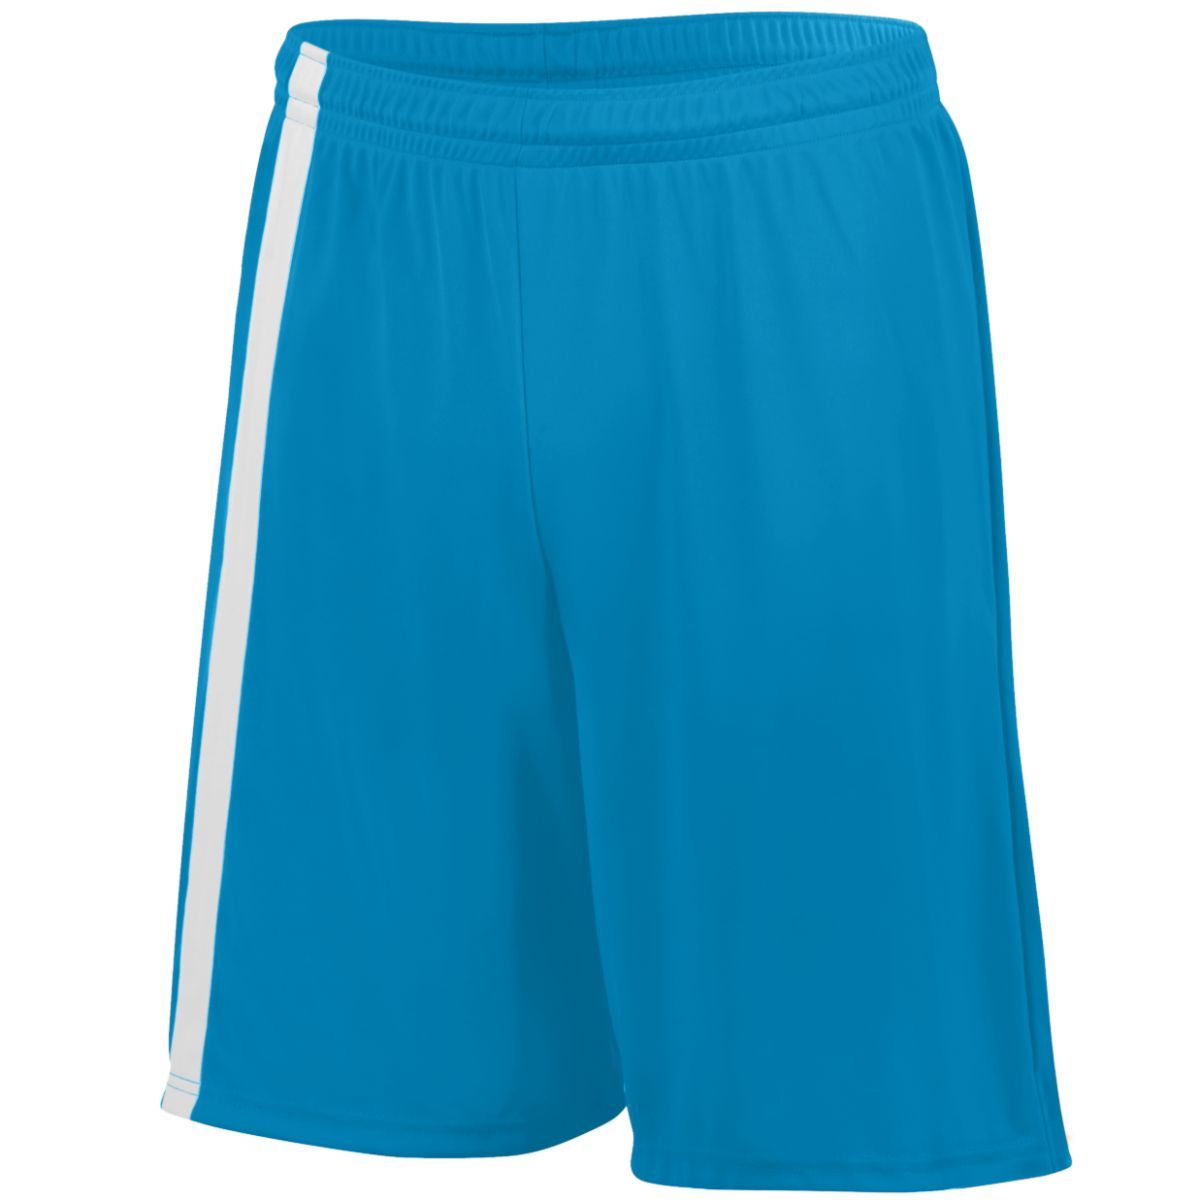 Augusta Sportswear Attacking Third Shorts in Power Blue/White  -Part of the Adult, Adult-Shorts, Augusta-Products, Soccer, All-Sports-1 product lines at KanaleyCreations.com